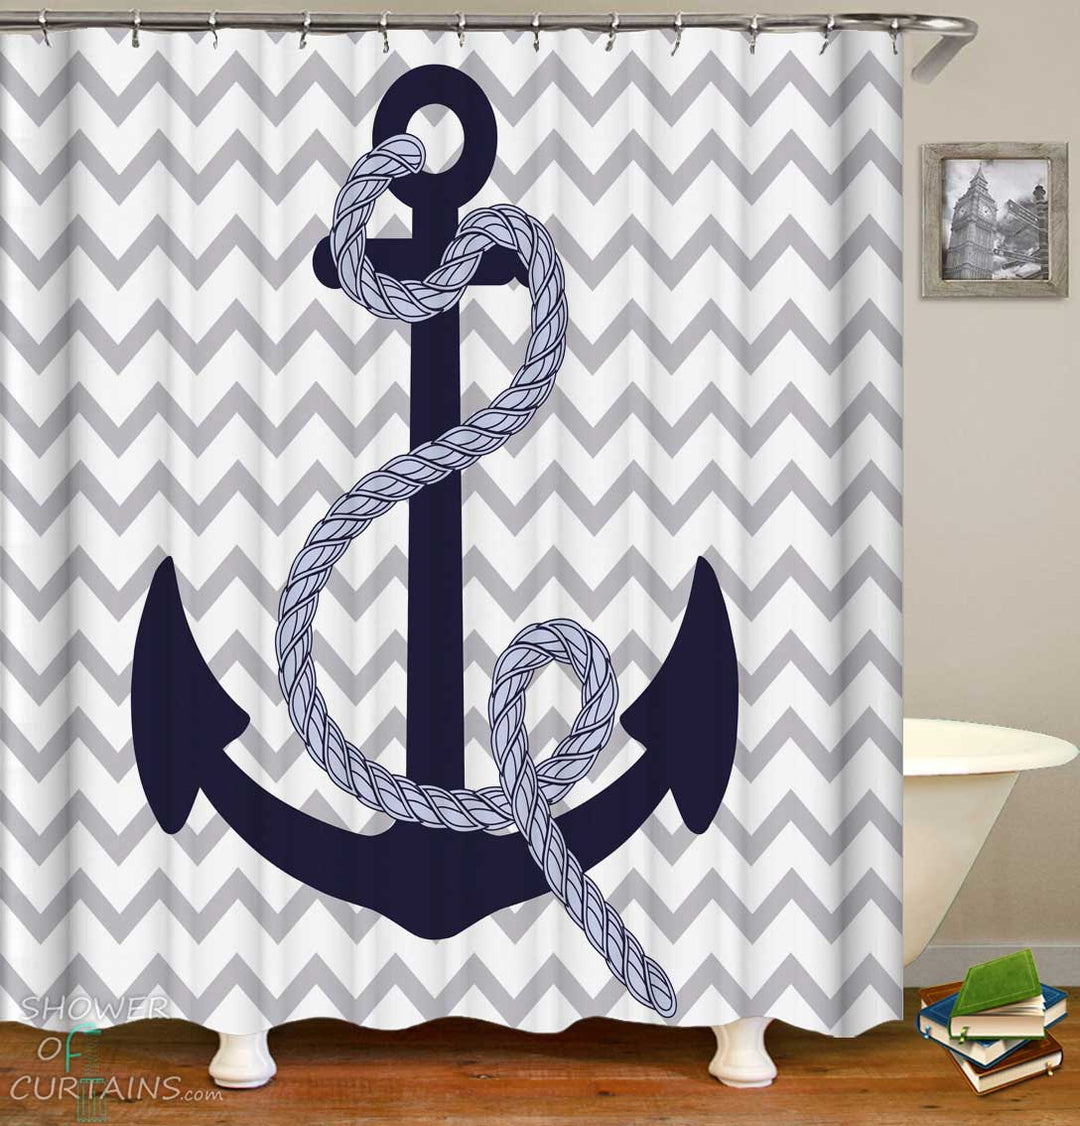 Shower Curtains with Rope and Anchor